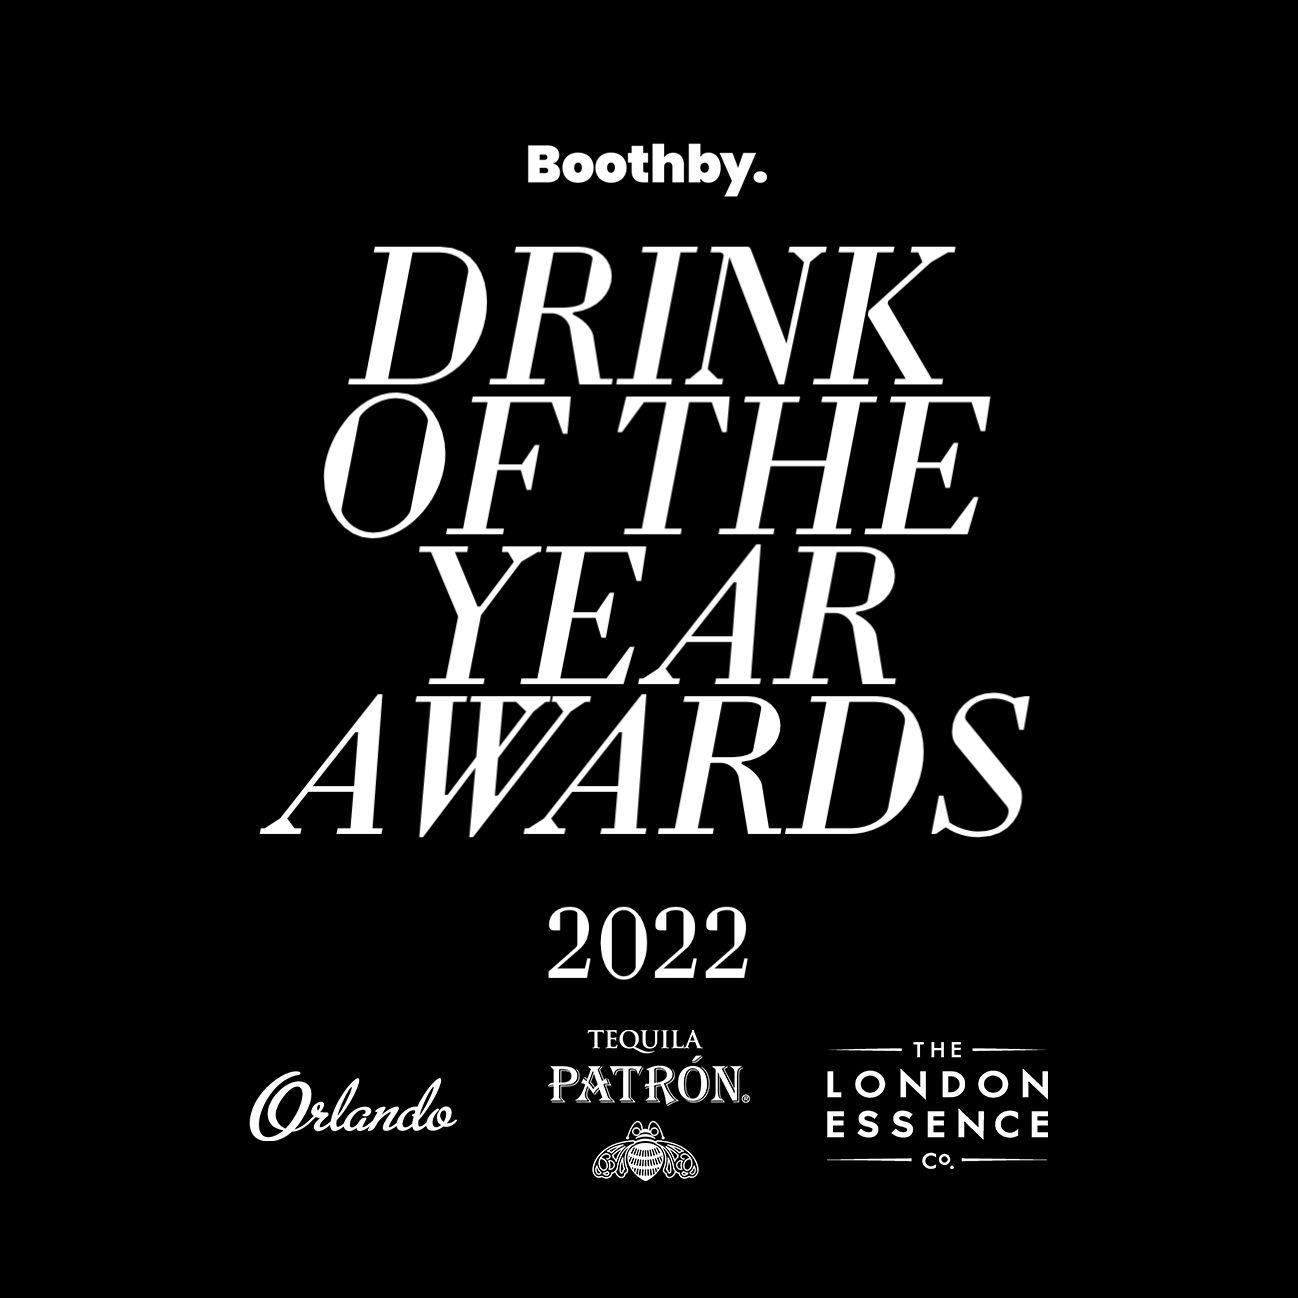 Entries in the Boothby Drink of the Year Awards close Monday 31 October